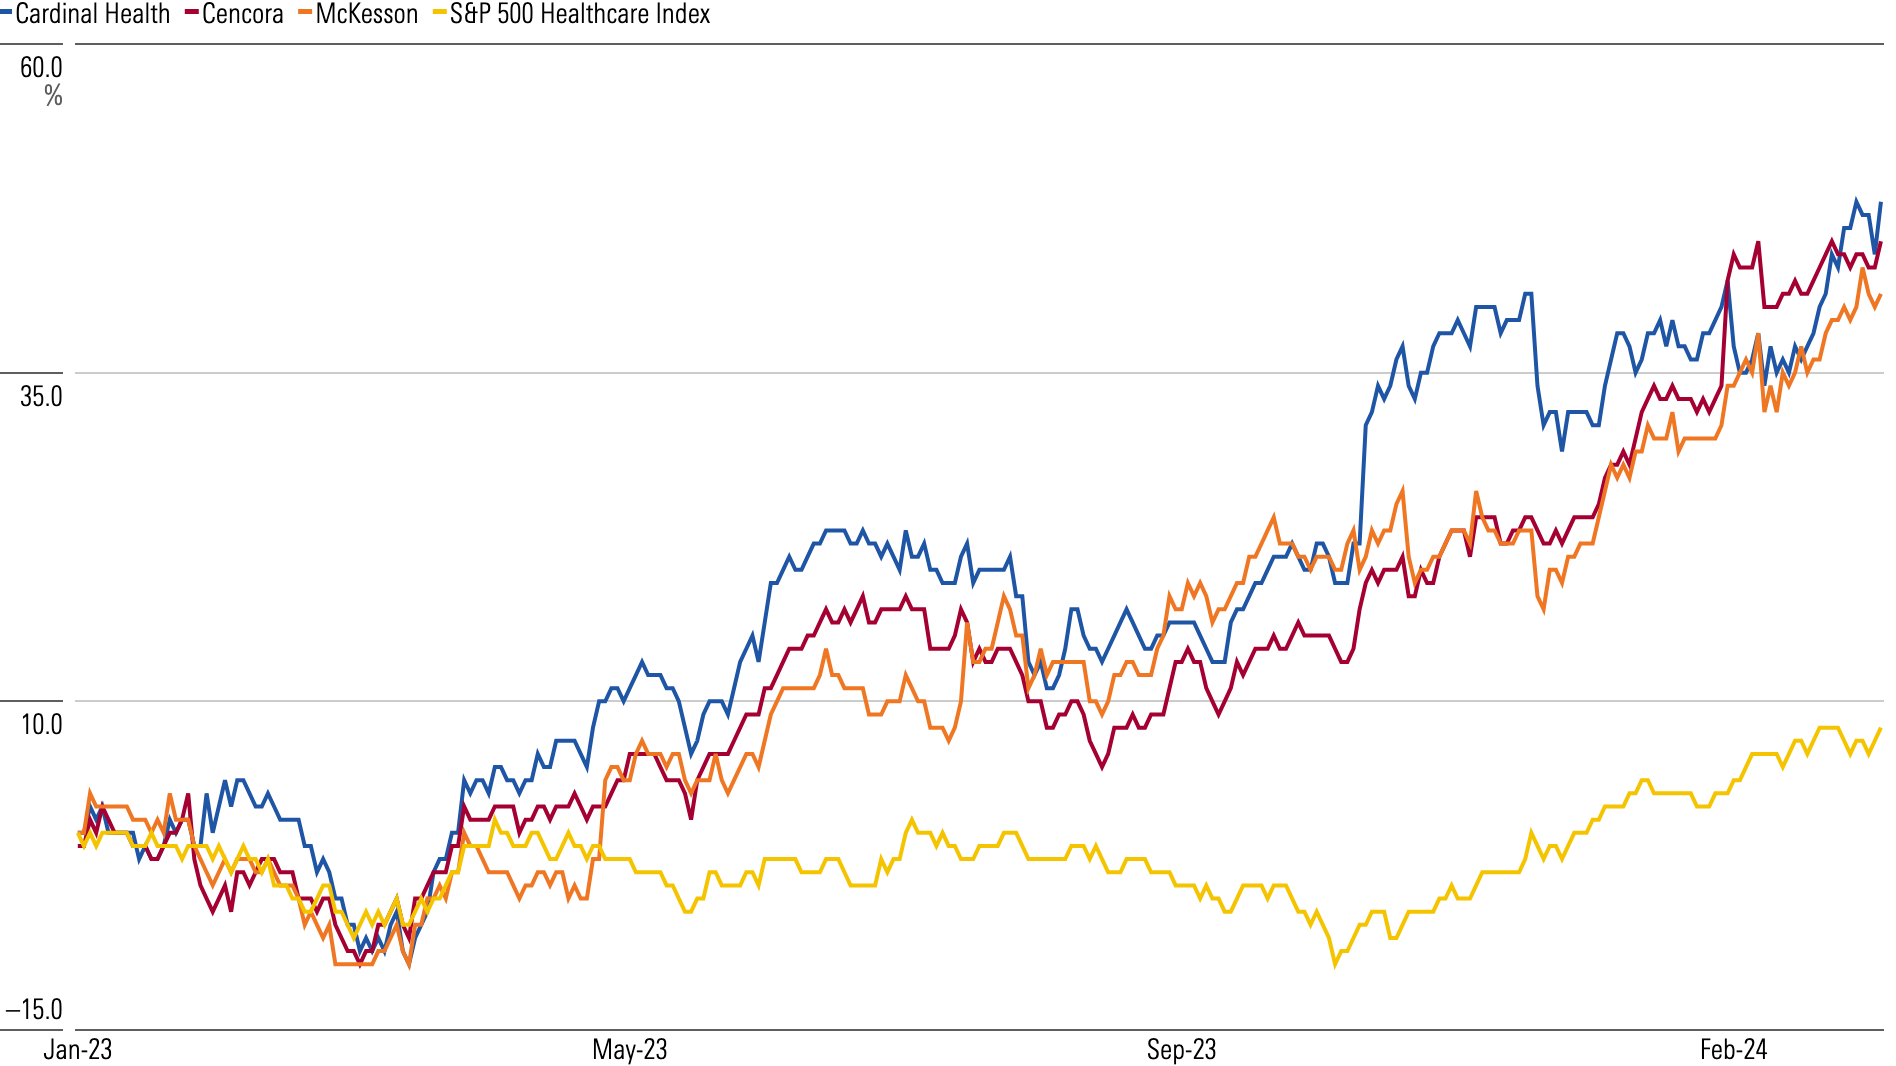 Line chart showing returns of Cardinal Health, Cencora, and McKesson outperform the returns of the broader S&P 500 Healthcare Index since January 2023.